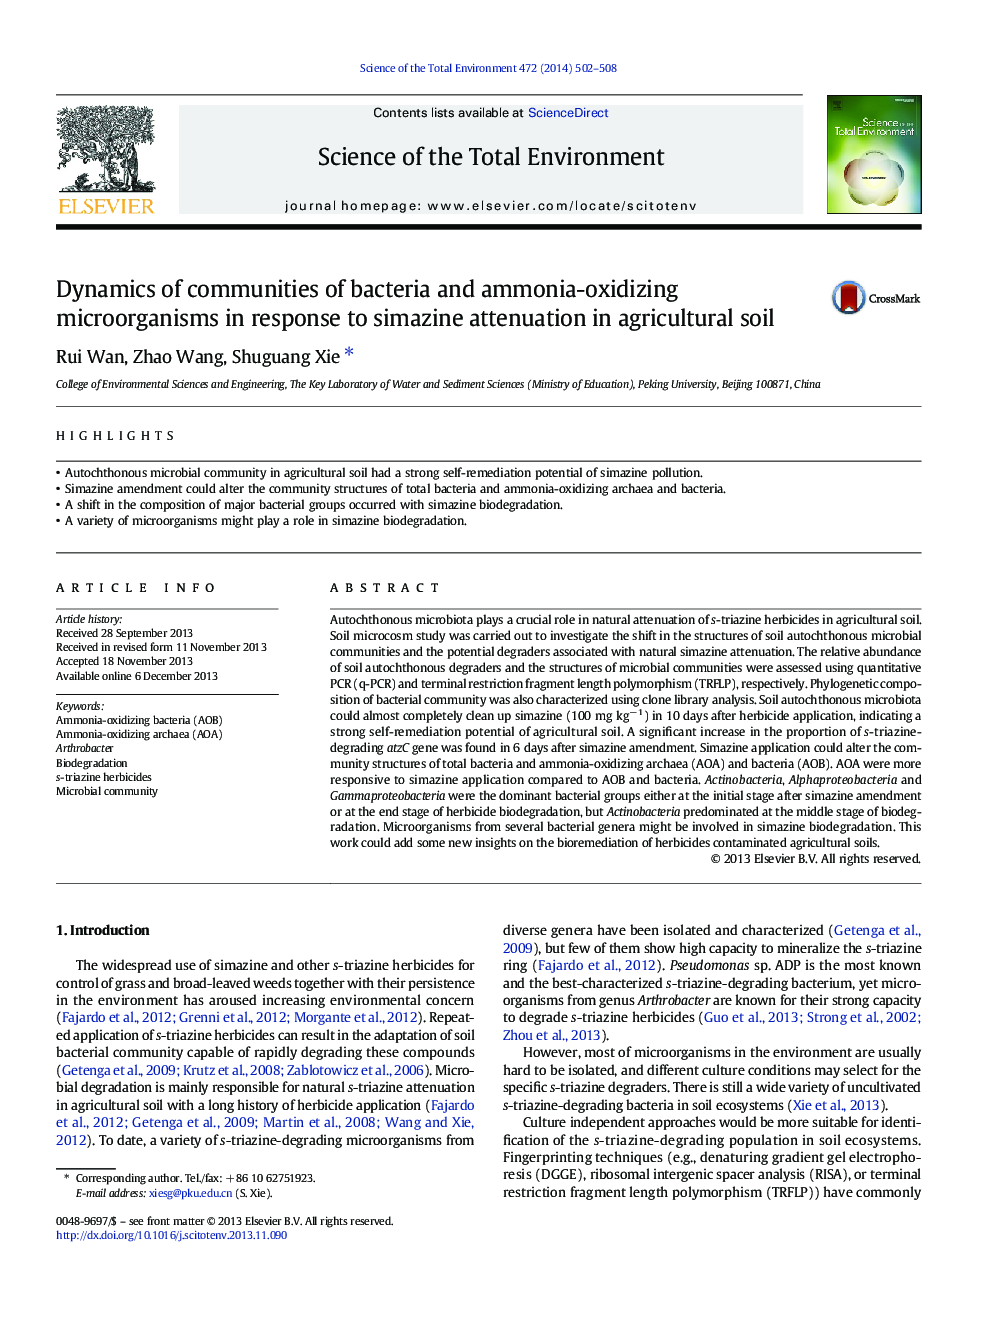 Dynamics of communities of bacteria and ammonia-oxidizing microorganisms in response to simazine attenuation in agricultural soil